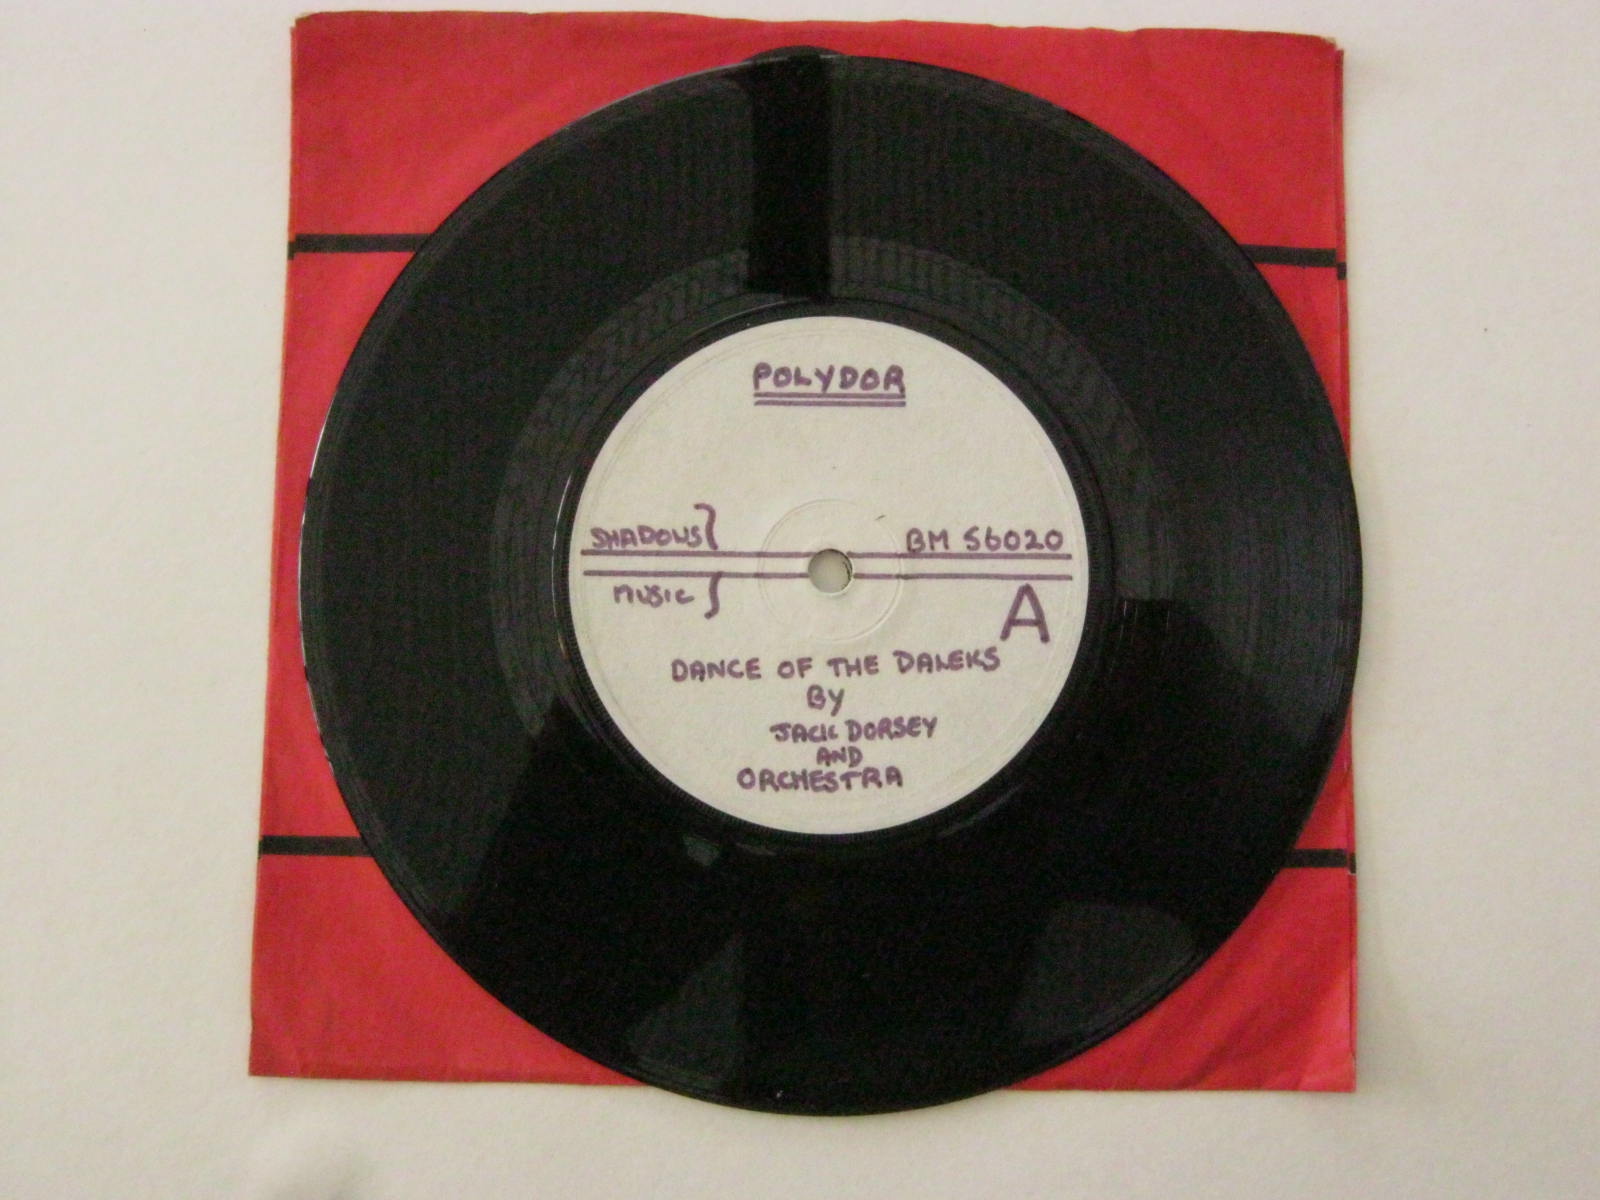 Jack Dorsey, Dance of the Daleks/The Likely Lads, Polydor BM 56020, 45rpm record, in company sleeve,